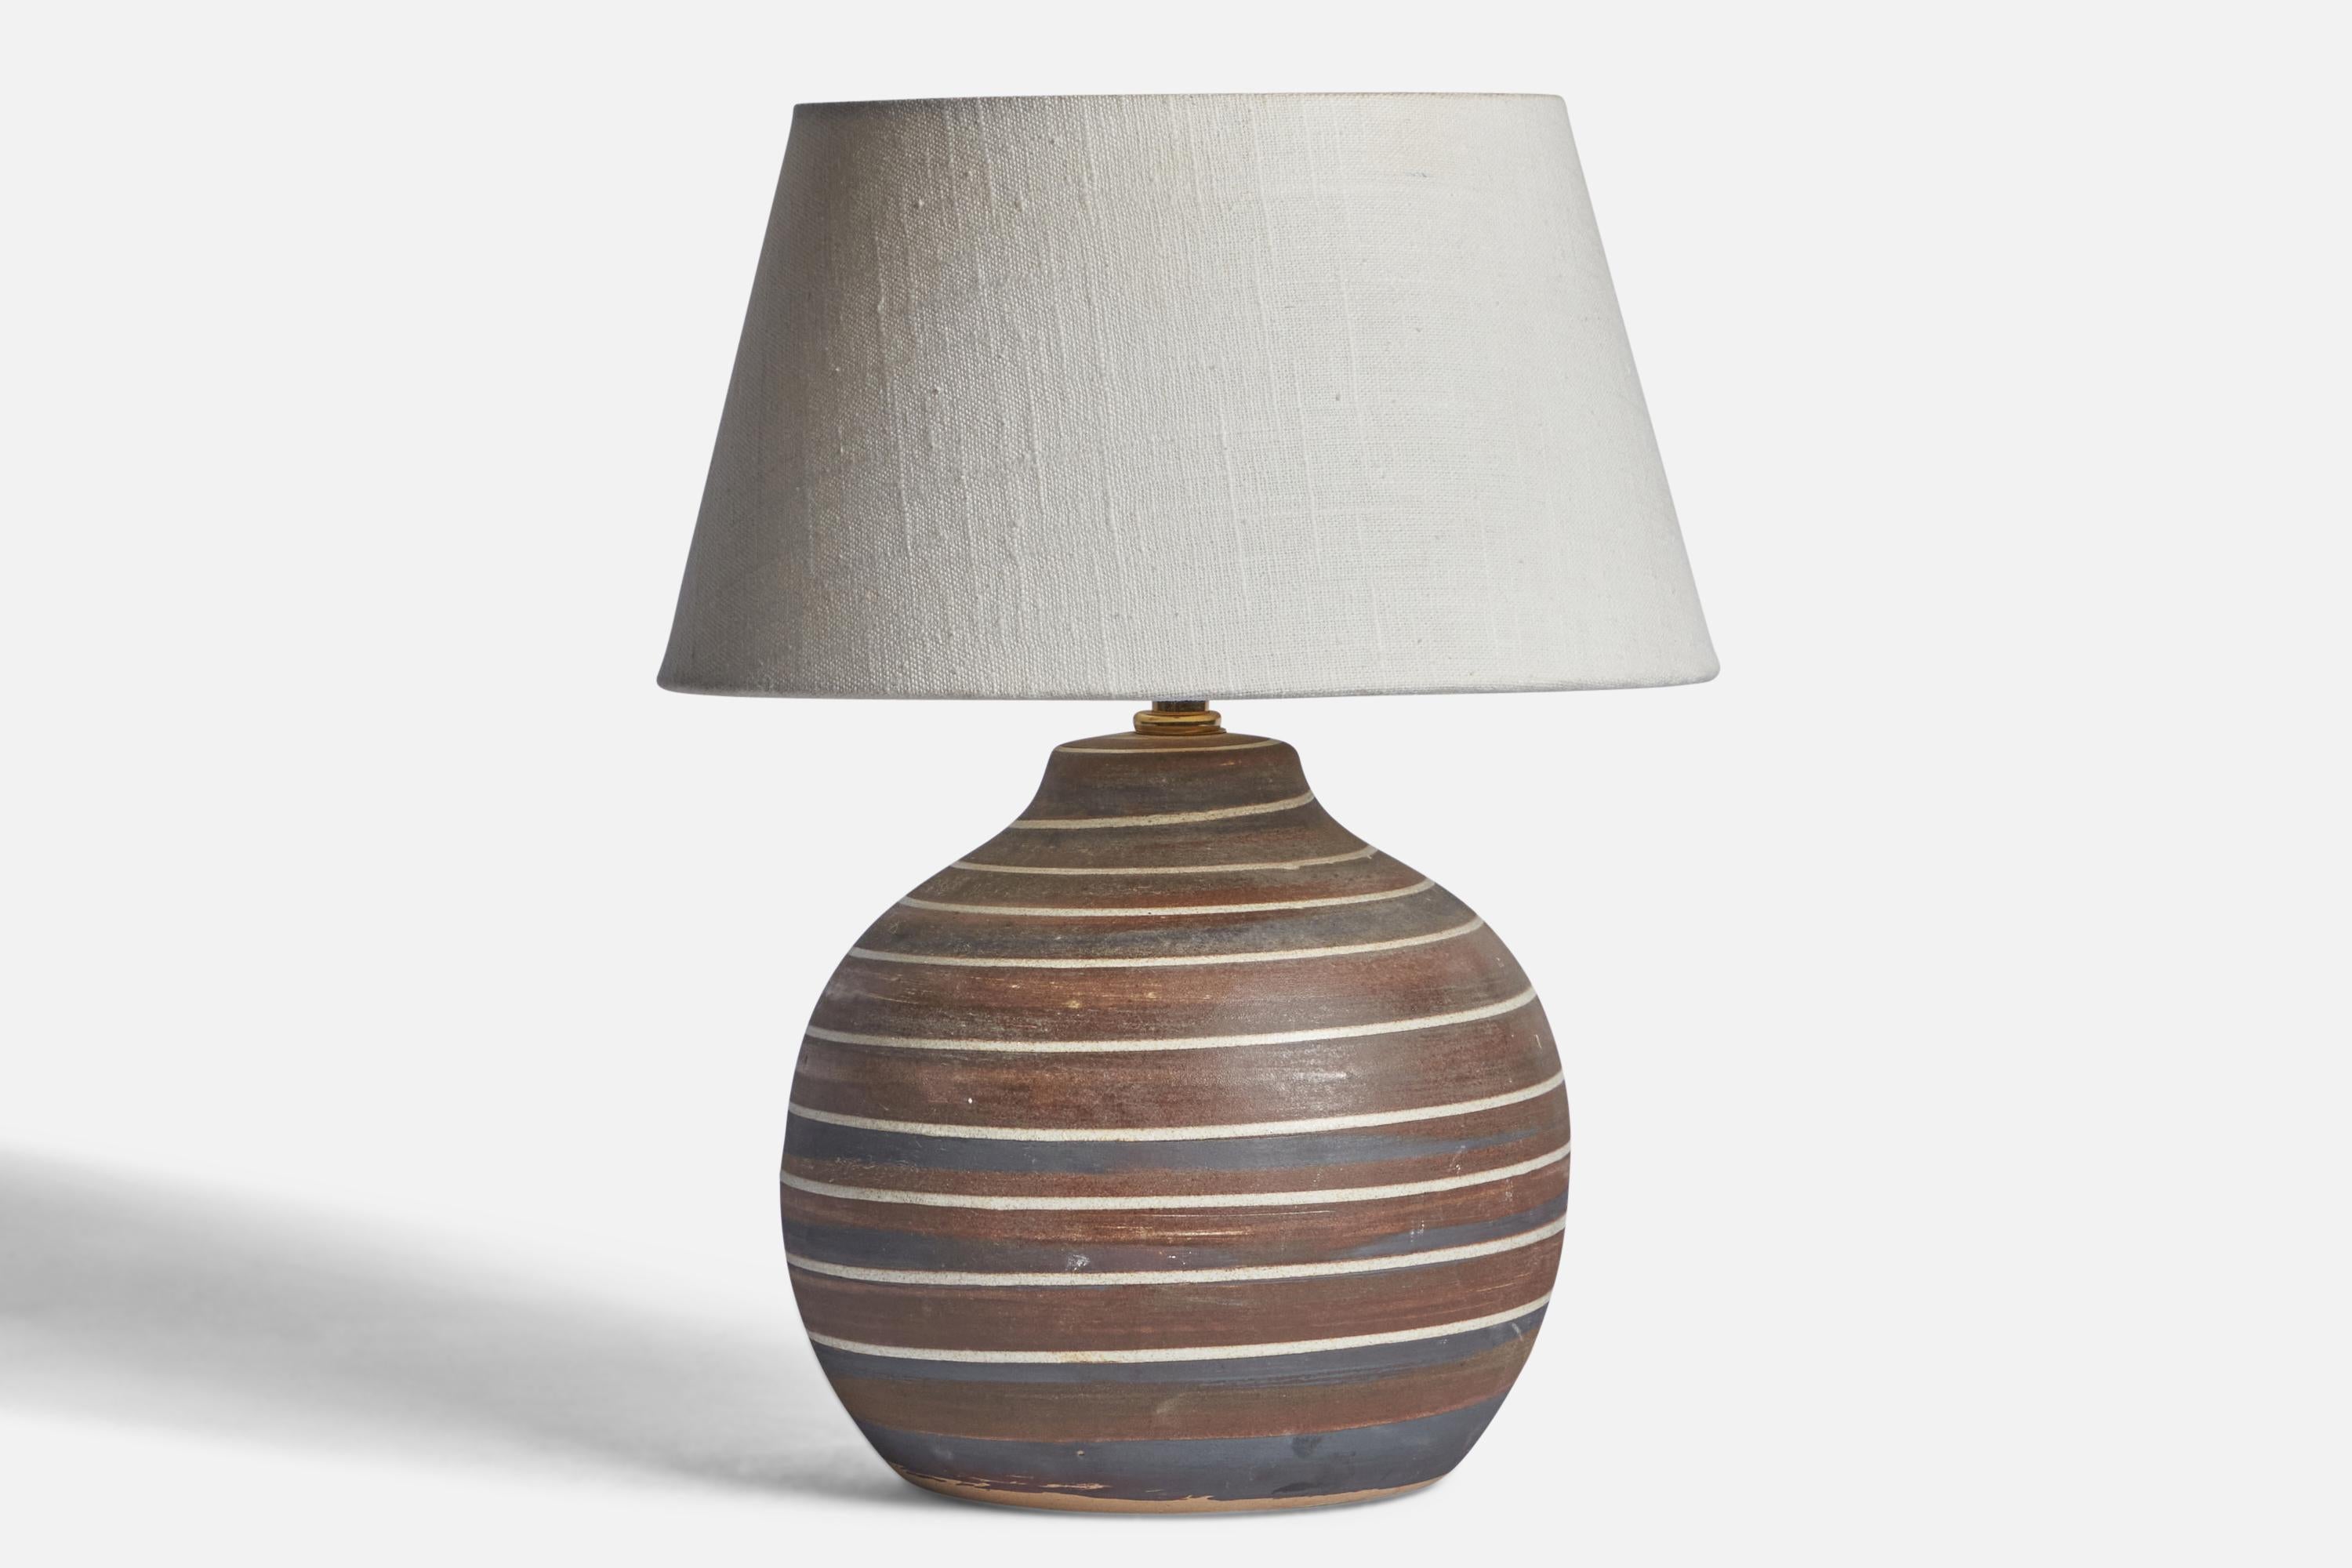 A grey and brown-glazed ceramic table lamp designed by Jane & Gordon Martz and produced by Marshall Studios, USA, 1960s.

Dimensions of Lamp (inches): 10” H x 7.3” Diameter
Dimensions of Shade (inches): 7” Top Diameter x 10” Bottom Diameter x 5.5” H